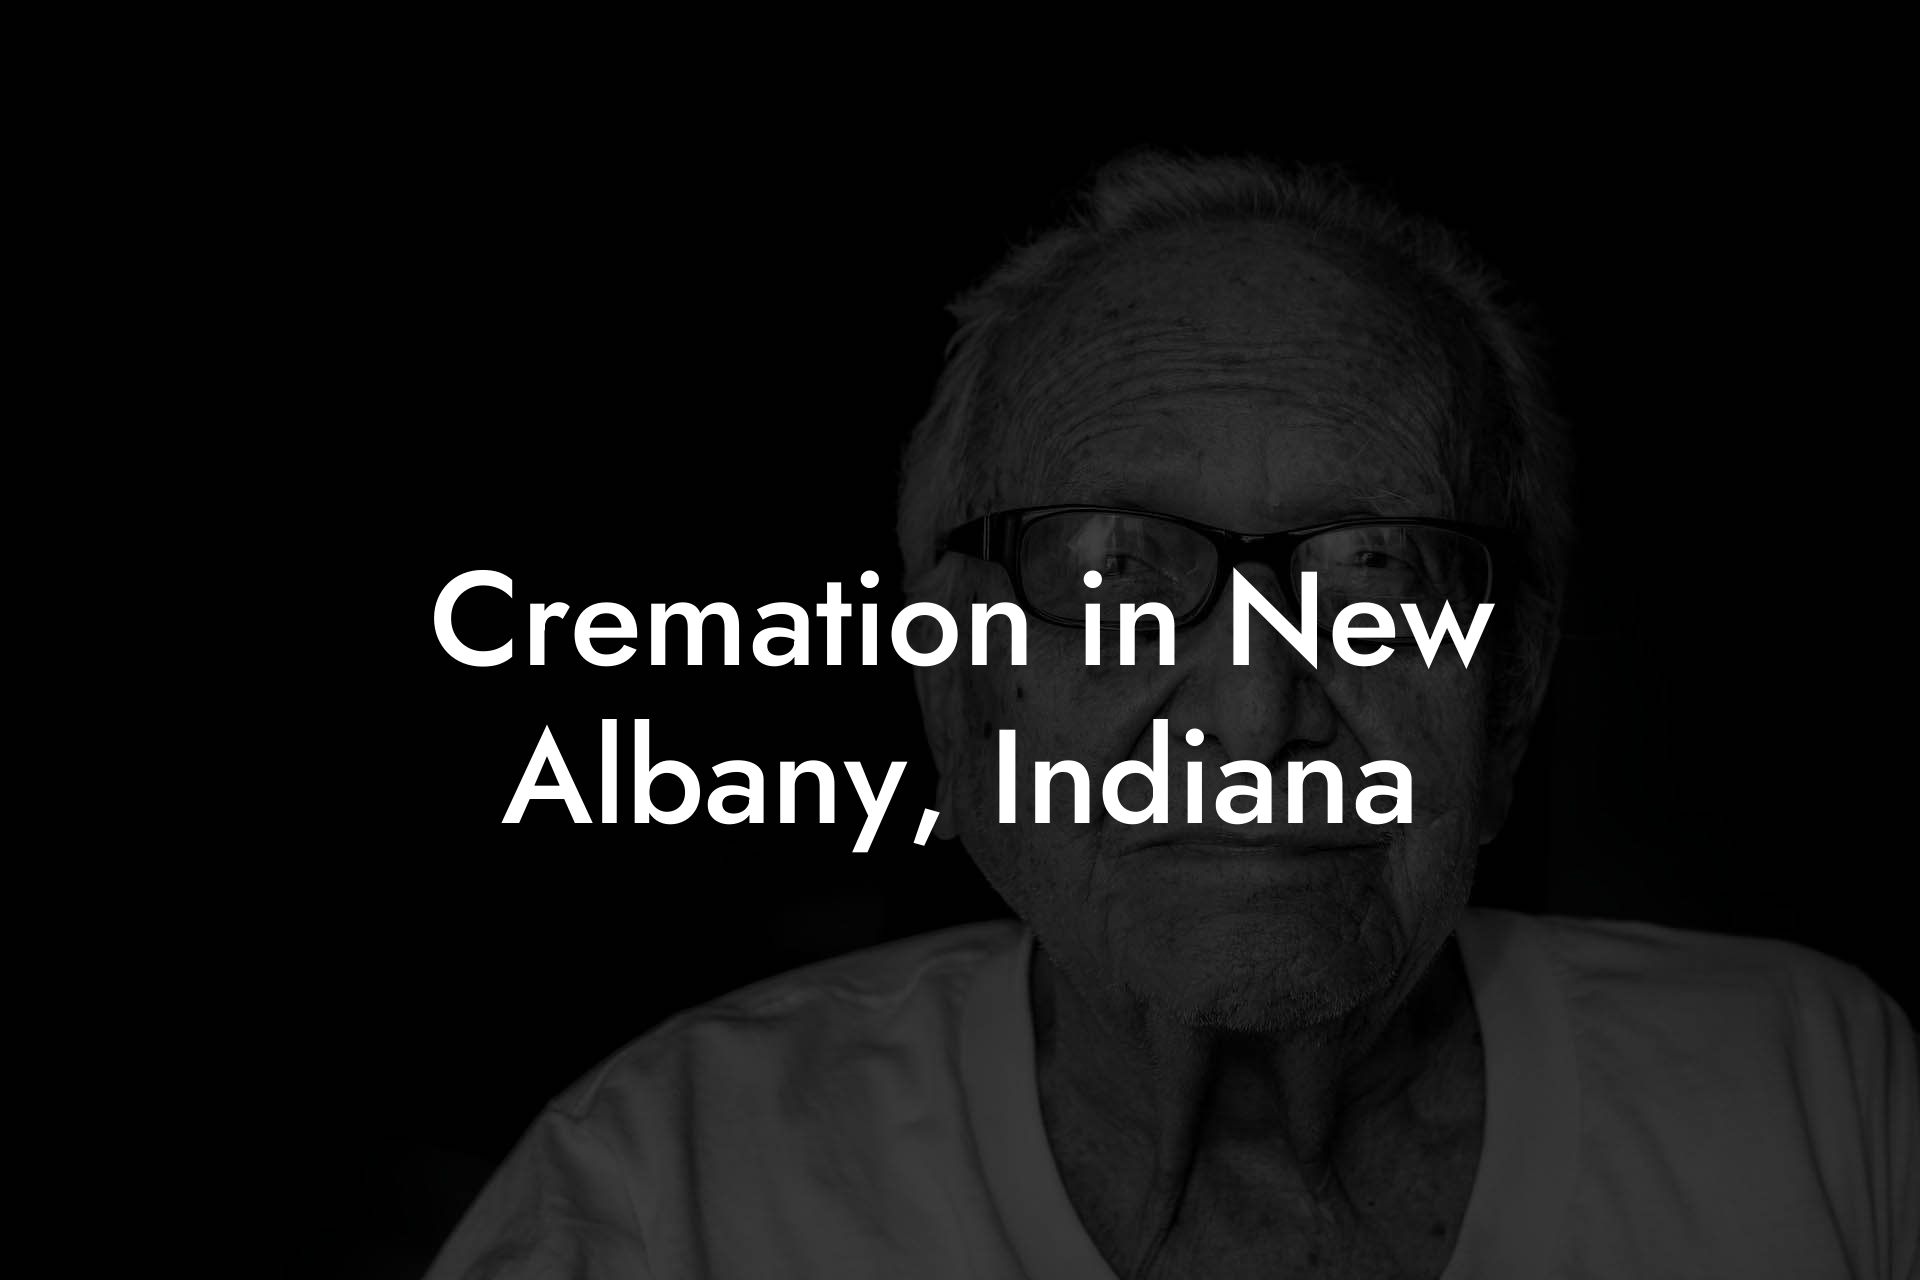 Cremation in New Albany, Indiana